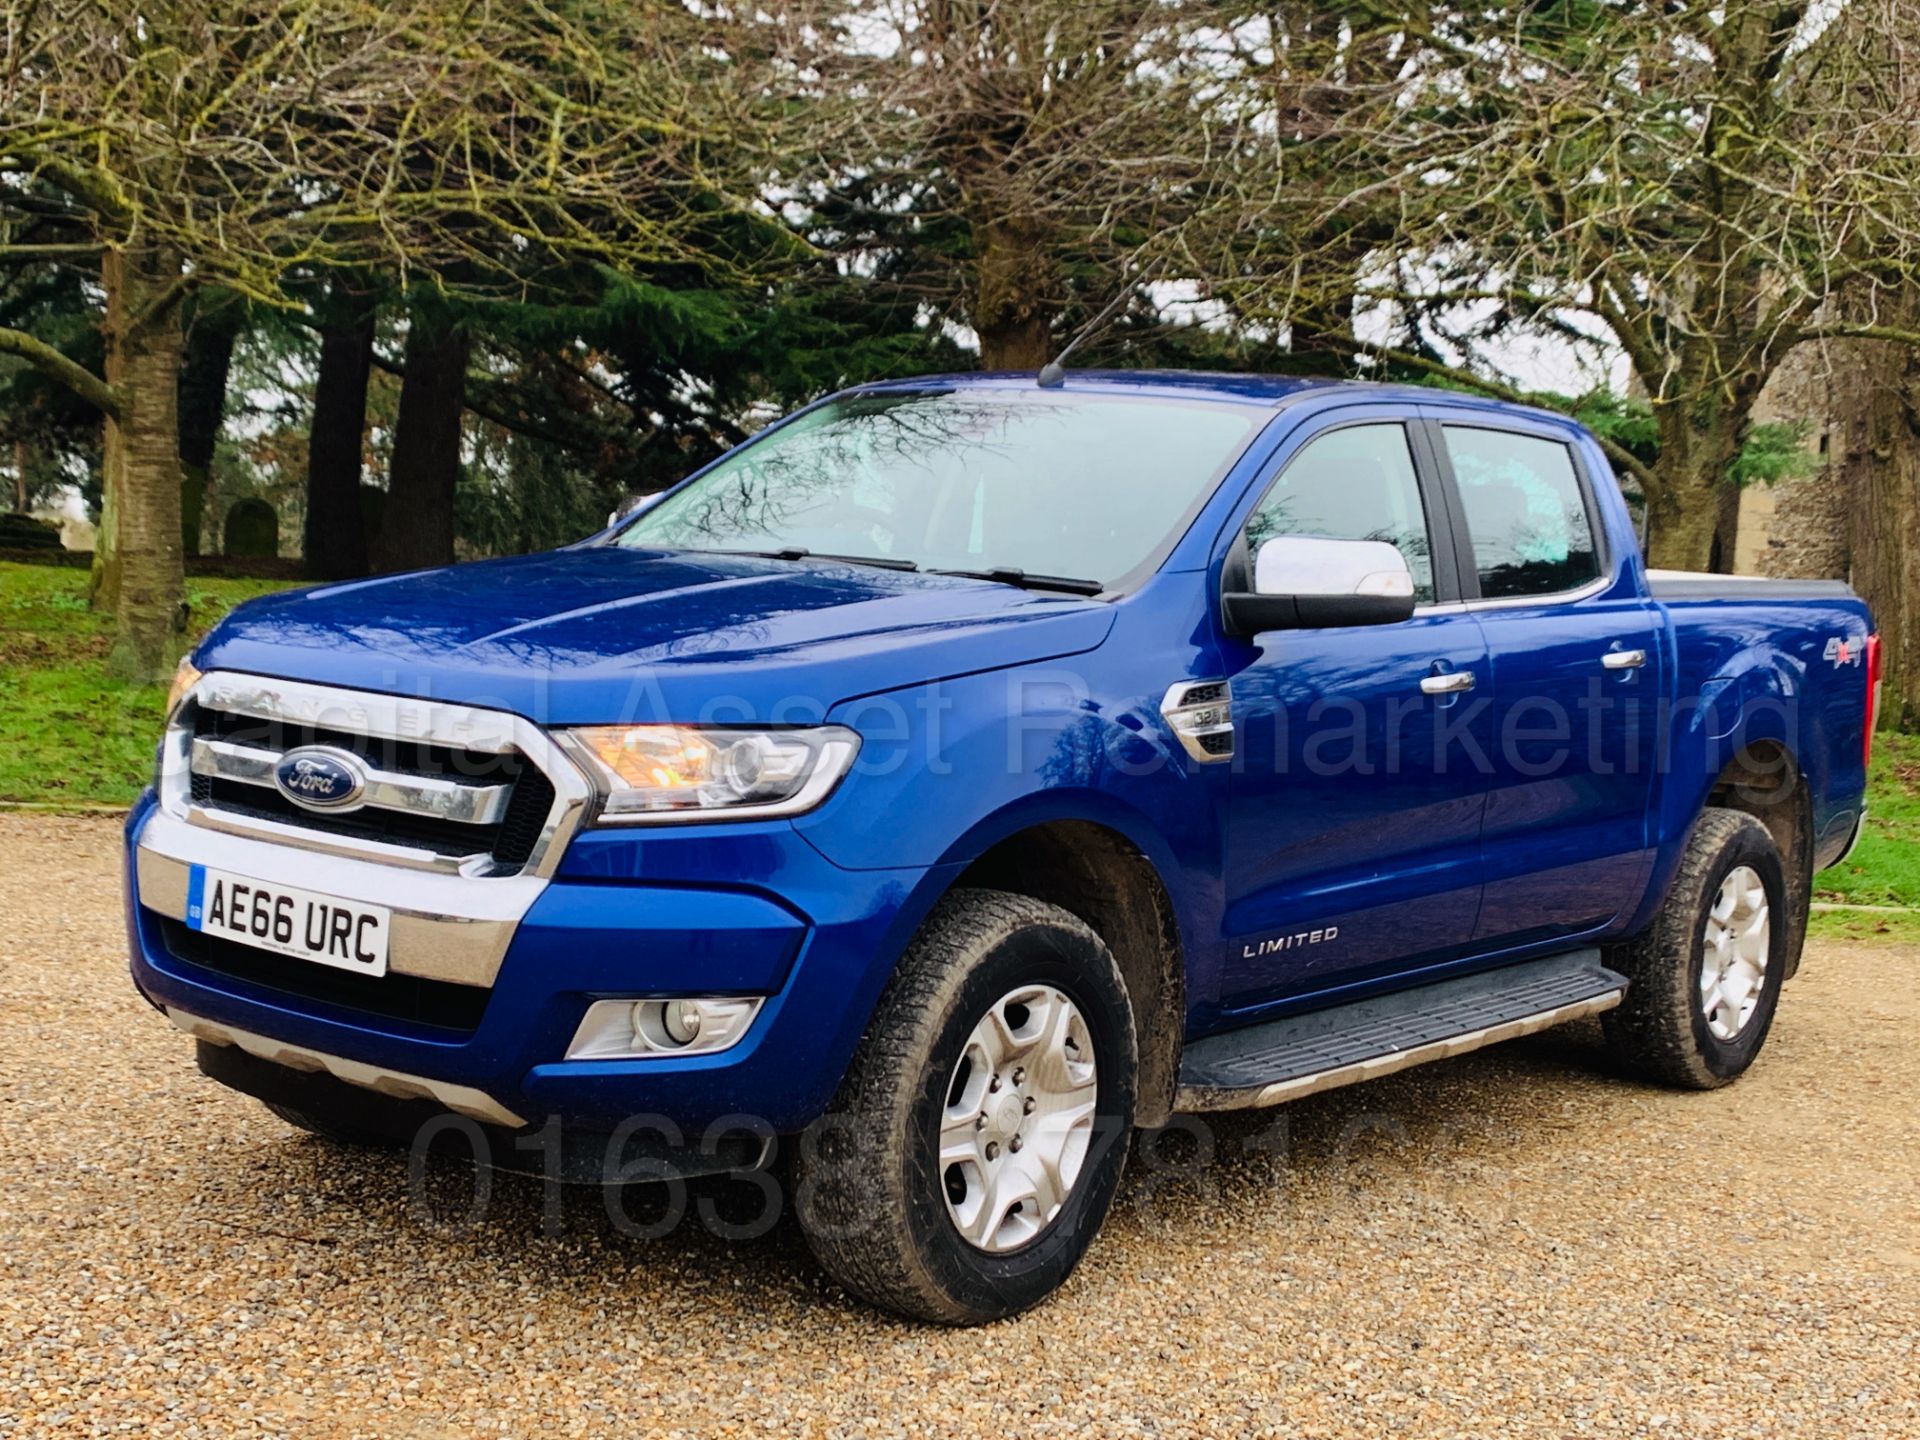 (On Sale) FORD RANGER *LIMITED* D/CAB PICK-UP (66 REG) '3.2 TDCI - 200 BHP - AUTO - LEATHER - NAV' - Image 5 of 58